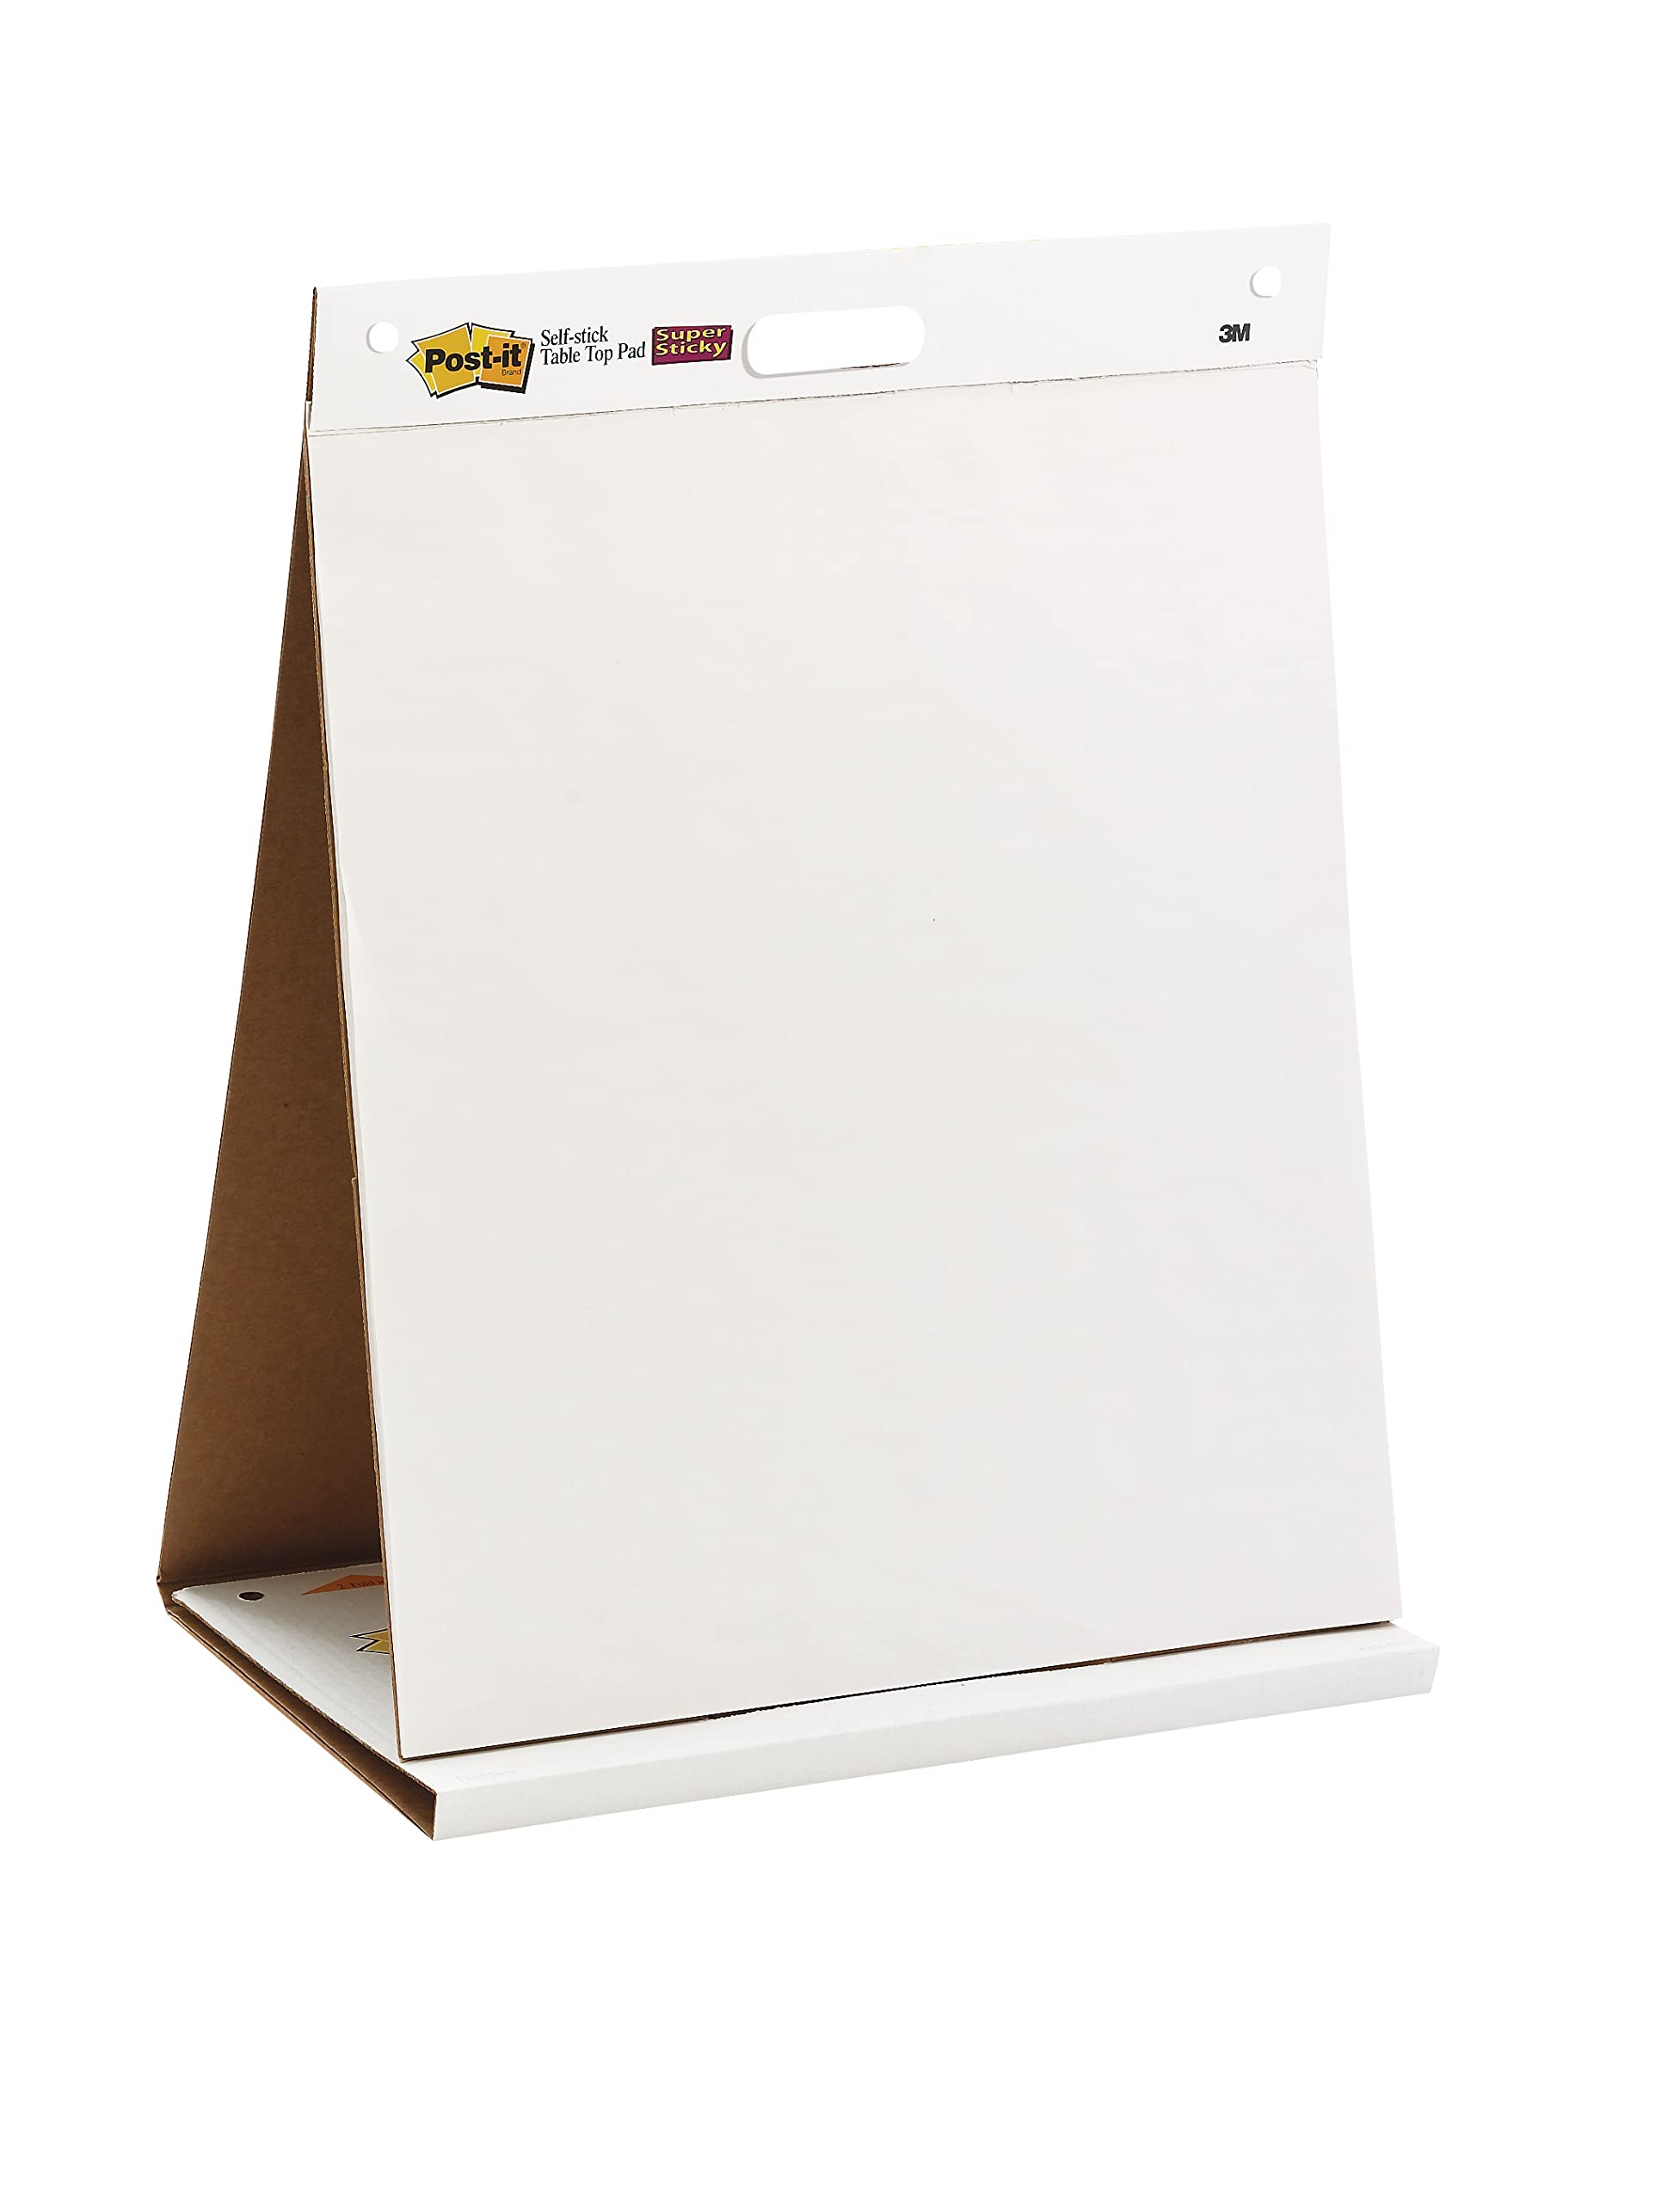 Post-it Super Sticky Recycled Meeting Charts, Pack of 1 Pad, with 20 Sheets ,584 mm x 508 mm, White Color - For Brainstorming Anywhere and Keeping all Ideas Visible